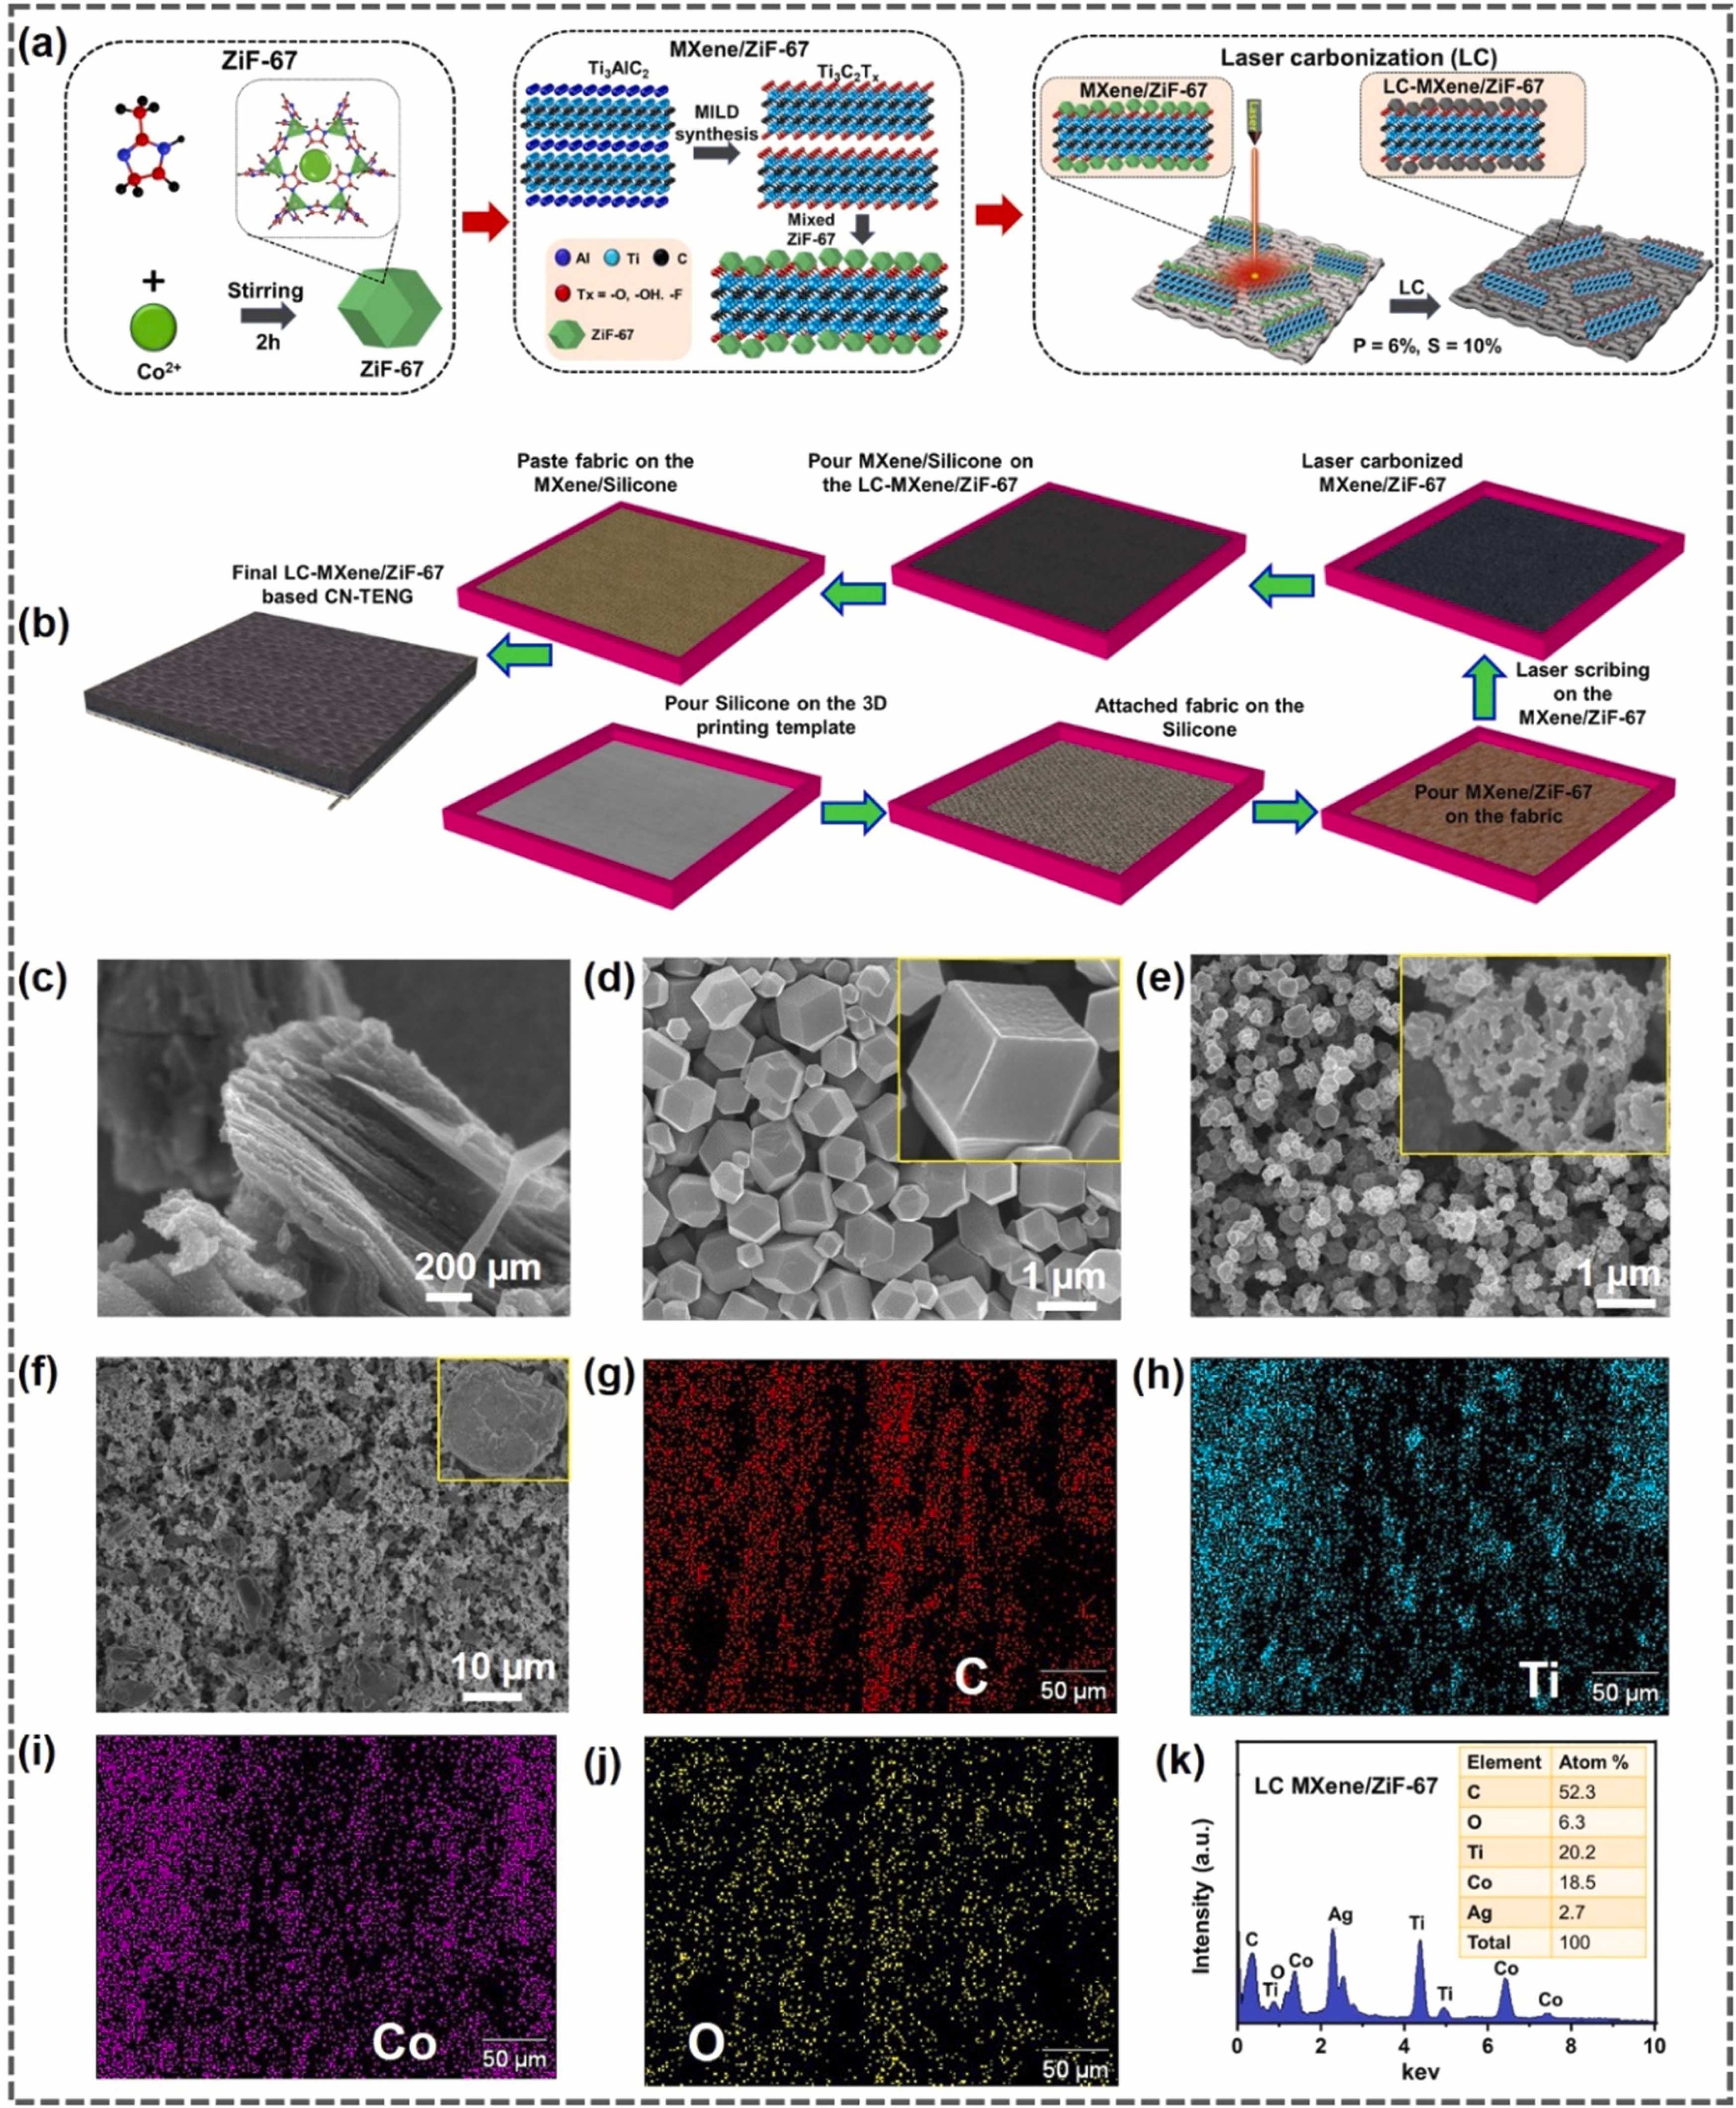 Laser-carbonized MXene/ZiF-67 nanocomposite as an intermediate layer for boosting the output performance of fabric-based triboelectric nanogenerator